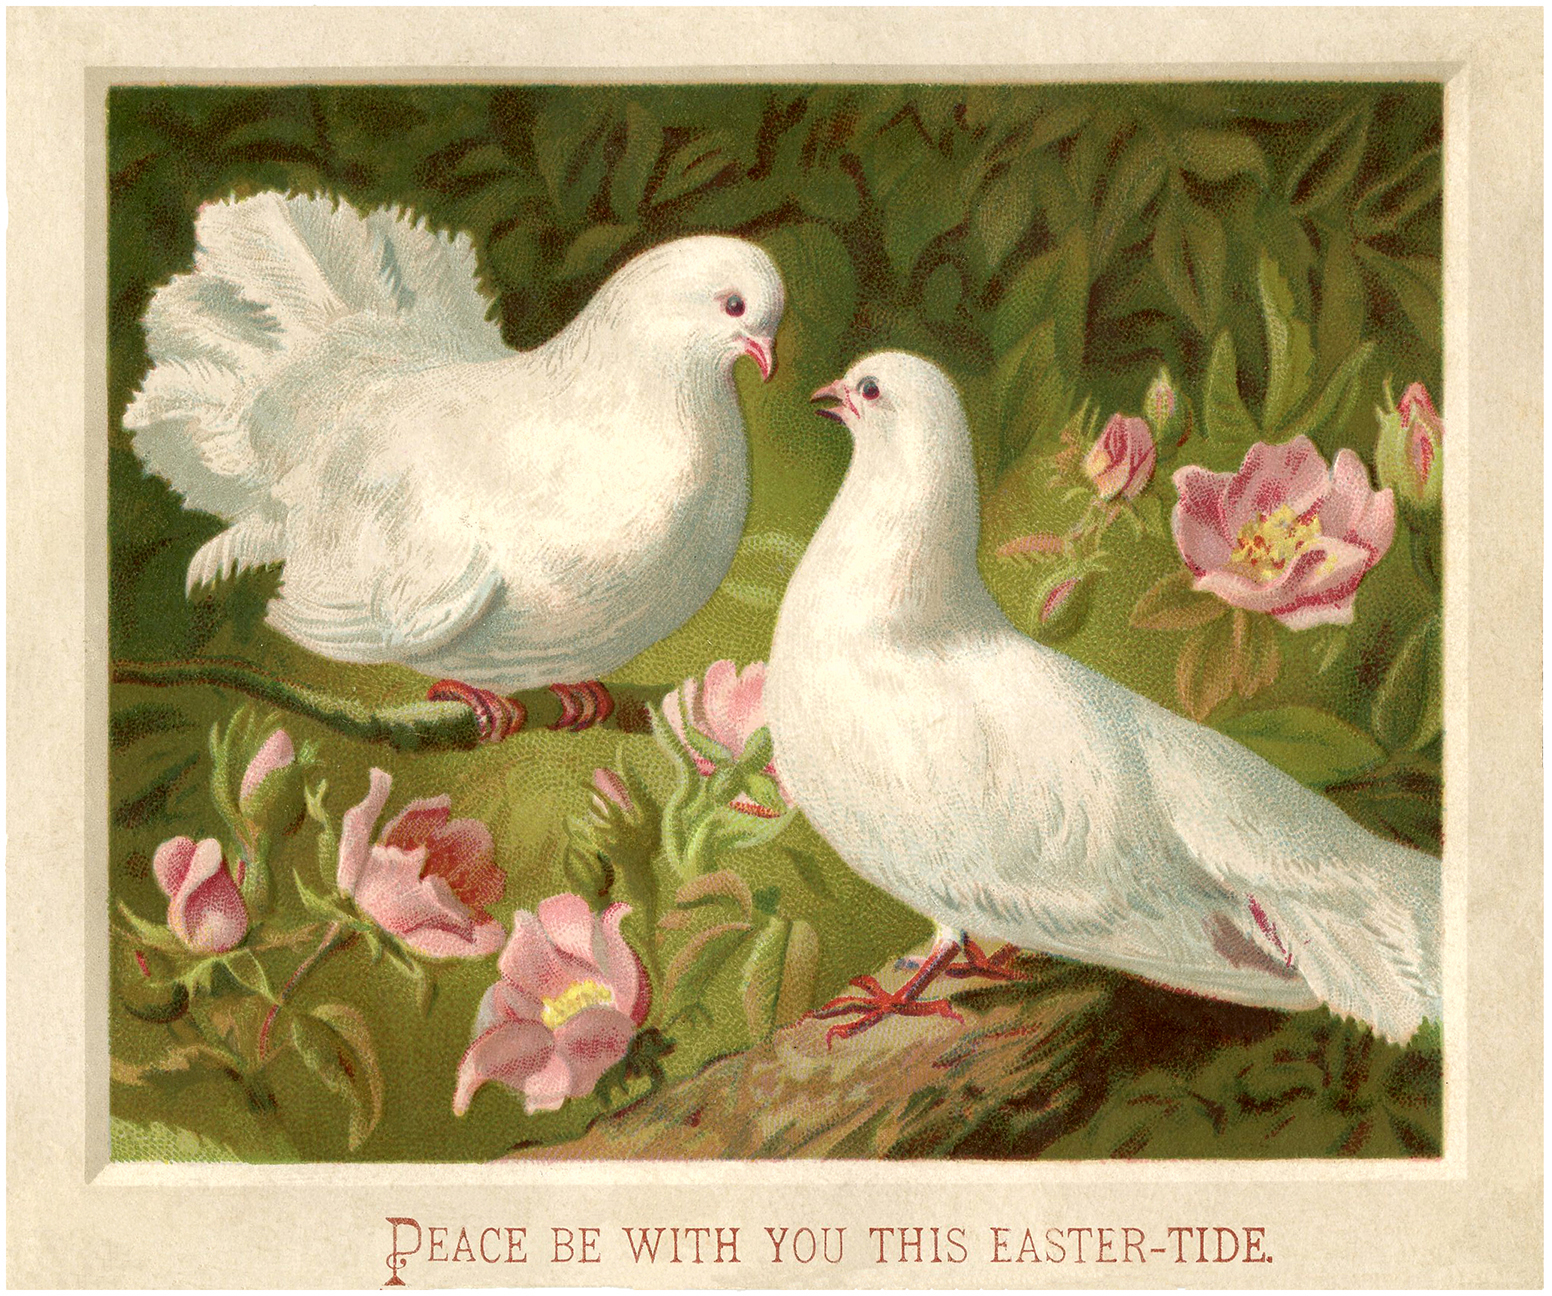 http://thegraphicsfairy.com/wp-content/uploads/2014/03/Vintage-Easter-Doves-Picture-GraphicsFairy.jpg